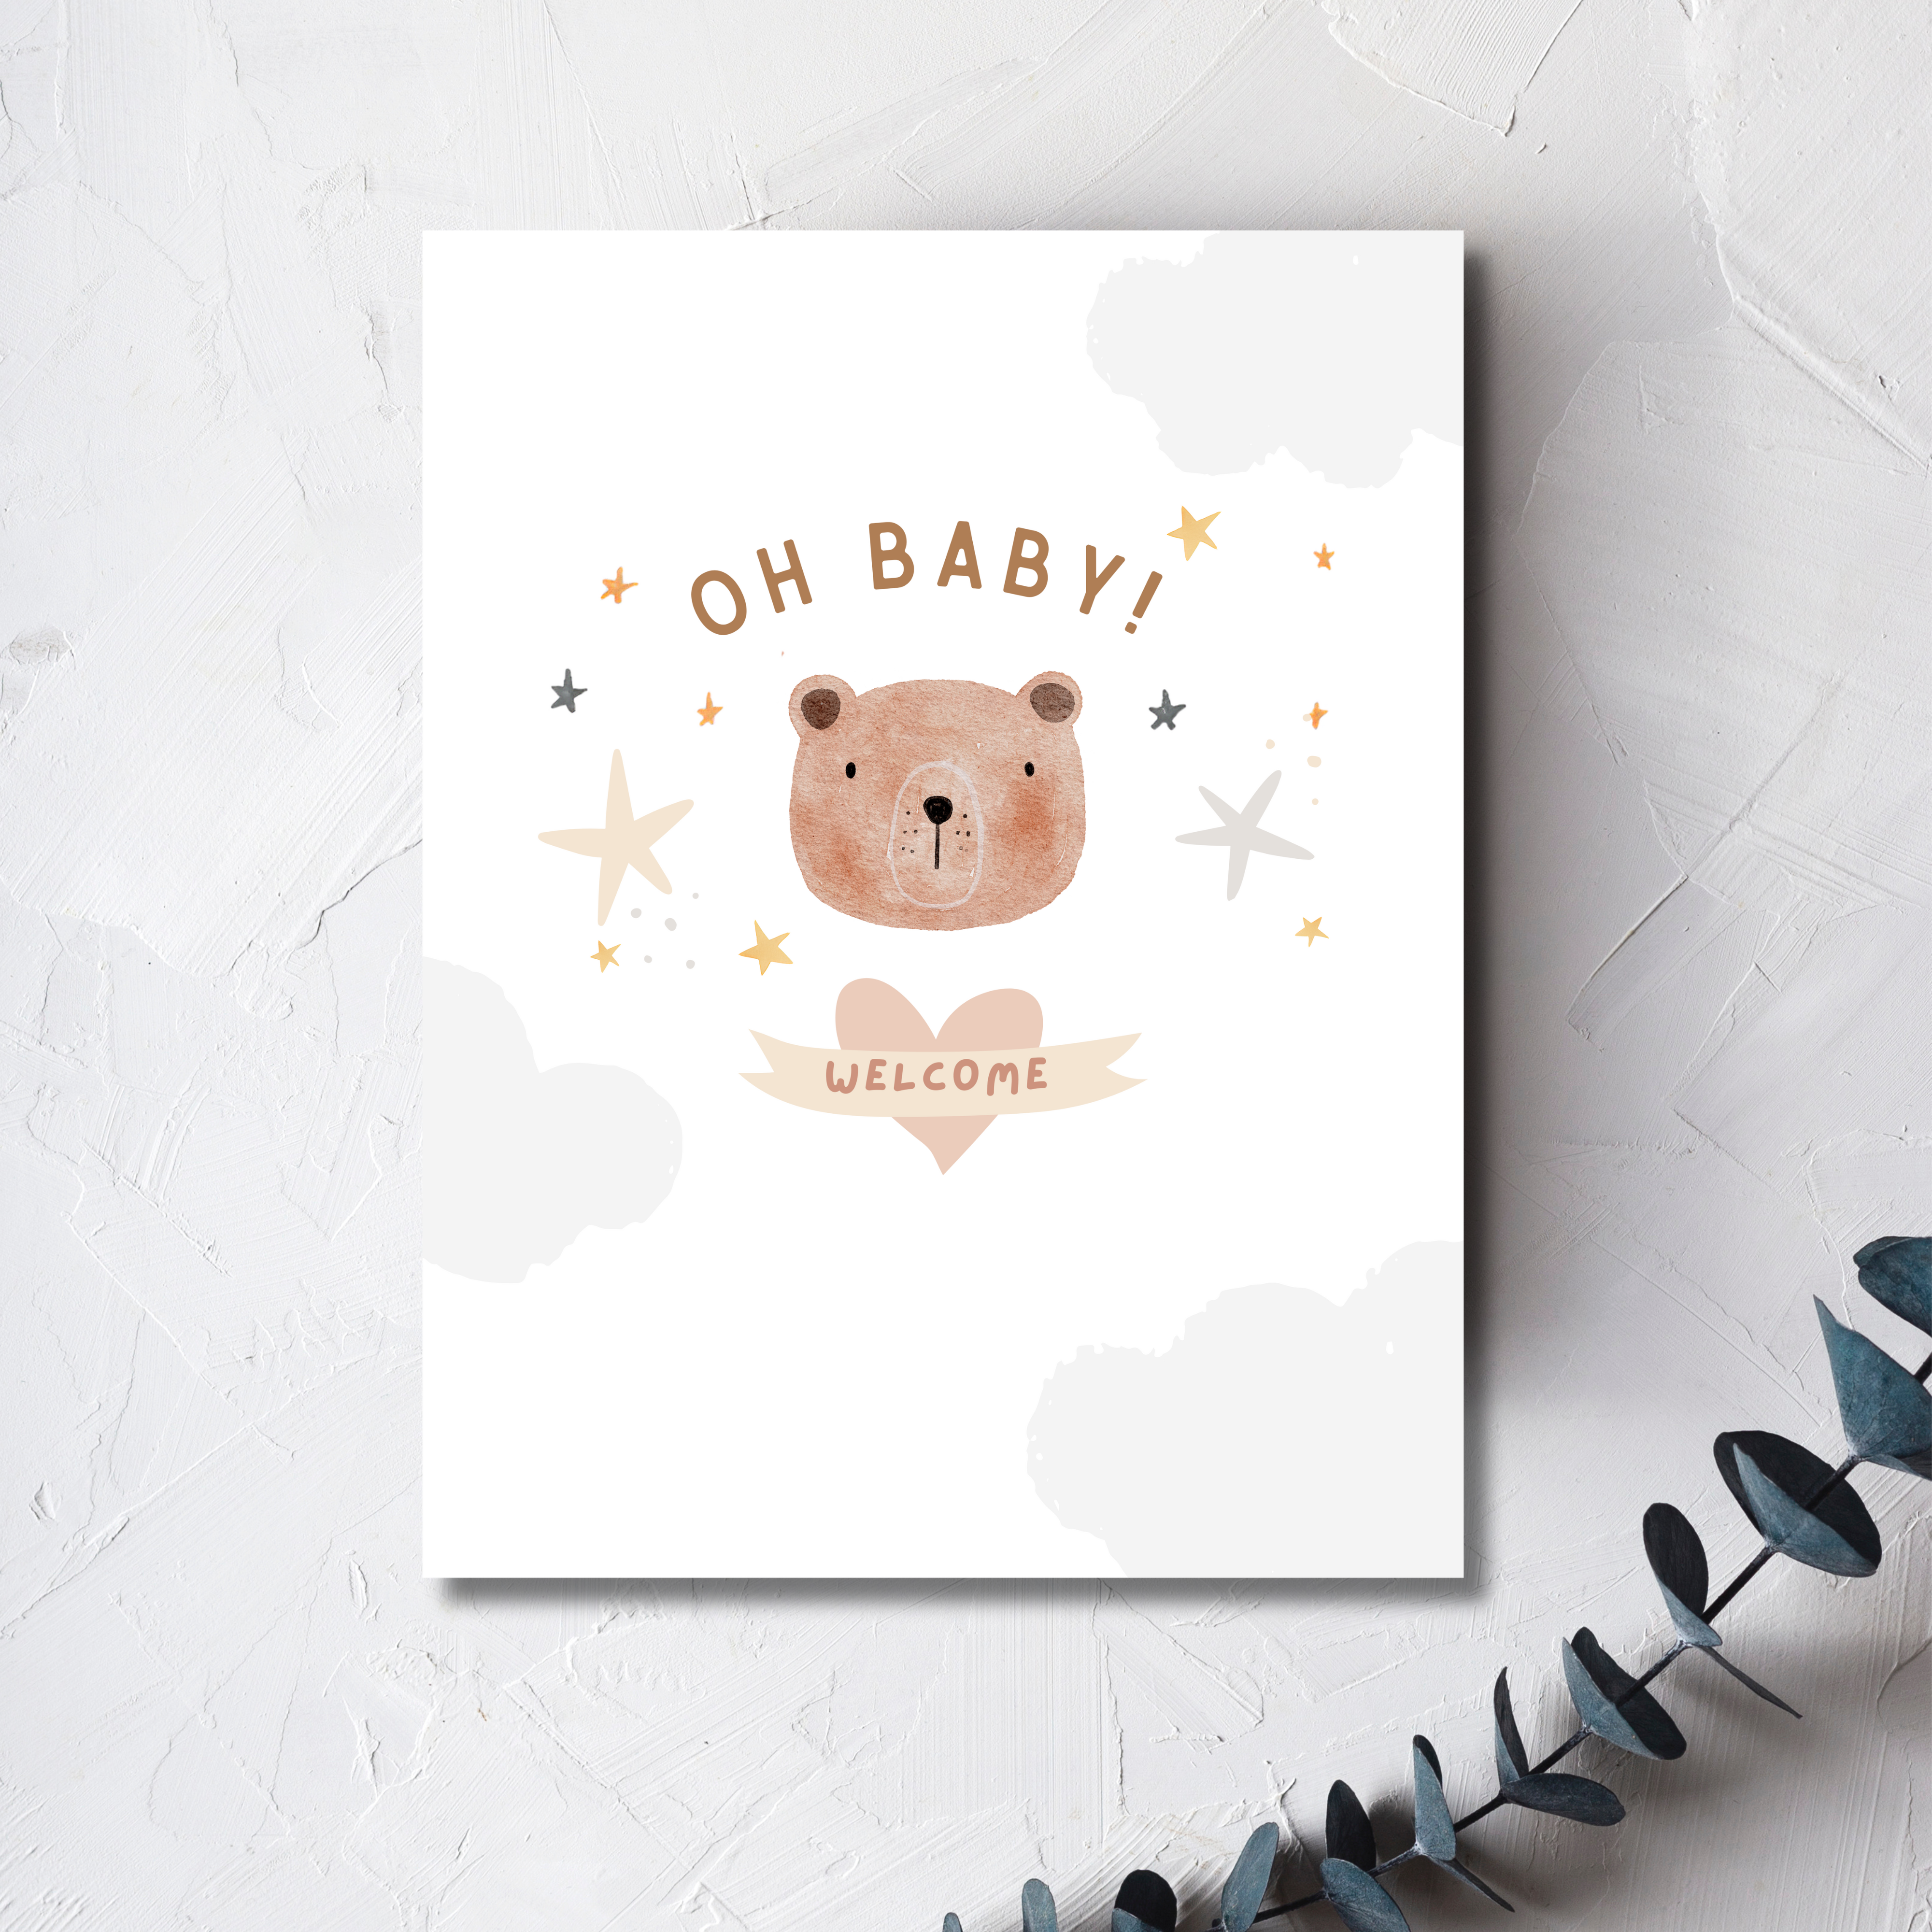 Watercolor illustration of a bear's head with neutral stars, clouds and text reading Oh Baby. A welcome banner and heart beneath the illustration.